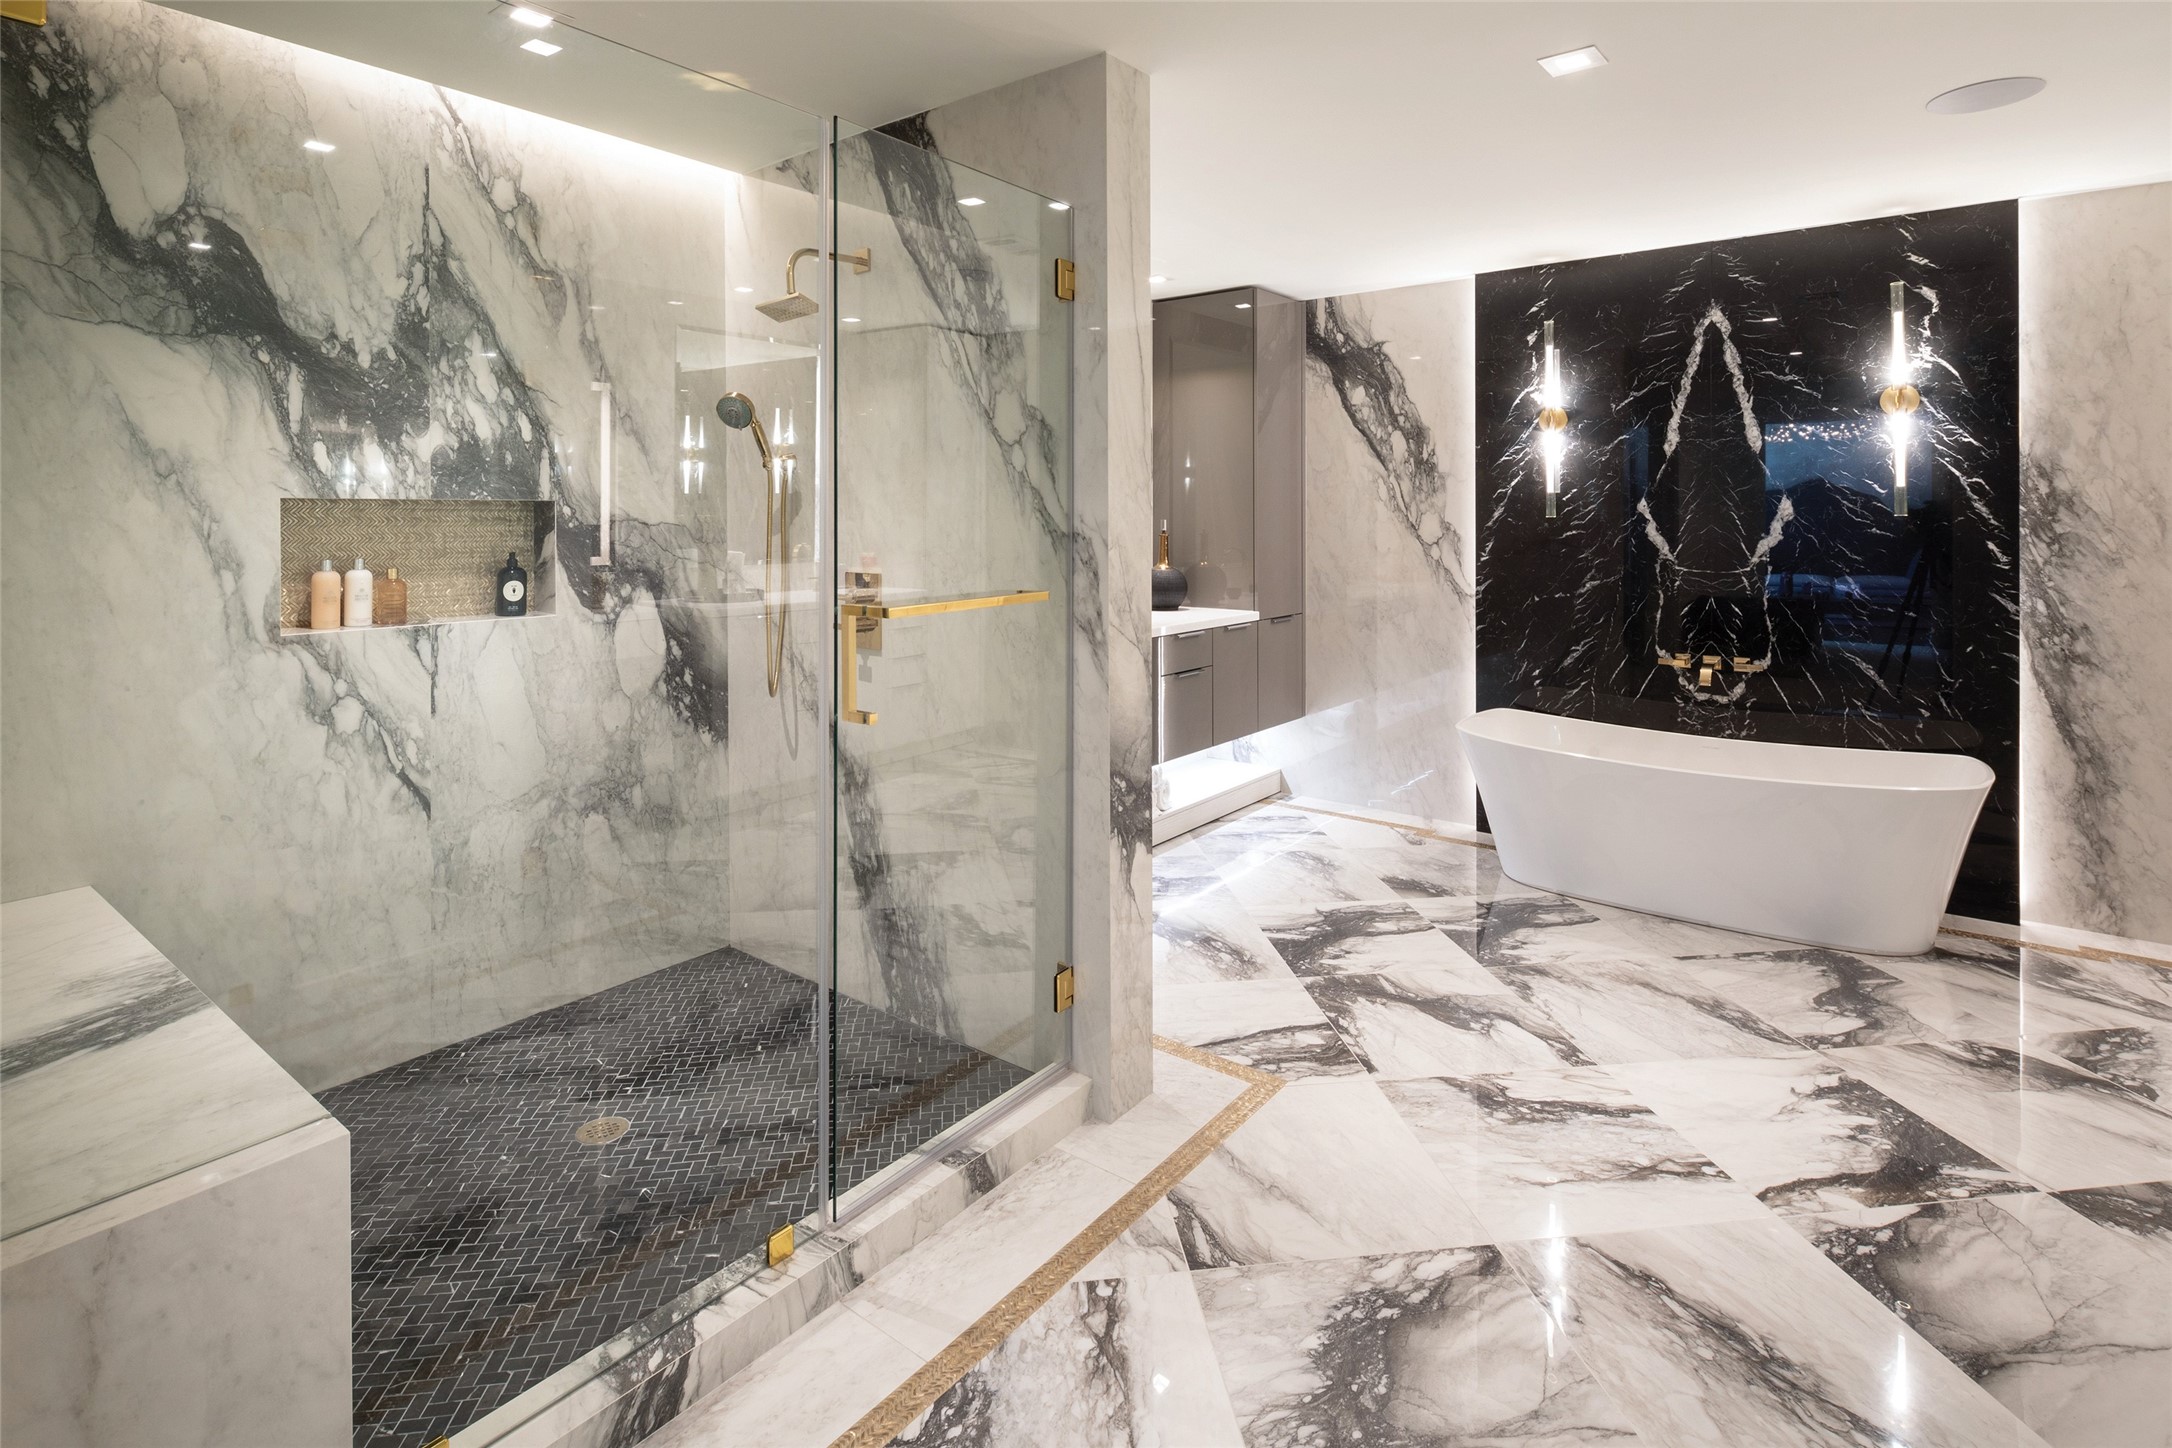 Luxurious bathrooms appointed in gold fixtures, a vast selection of stones, porcelains, and/or all to your design specification.